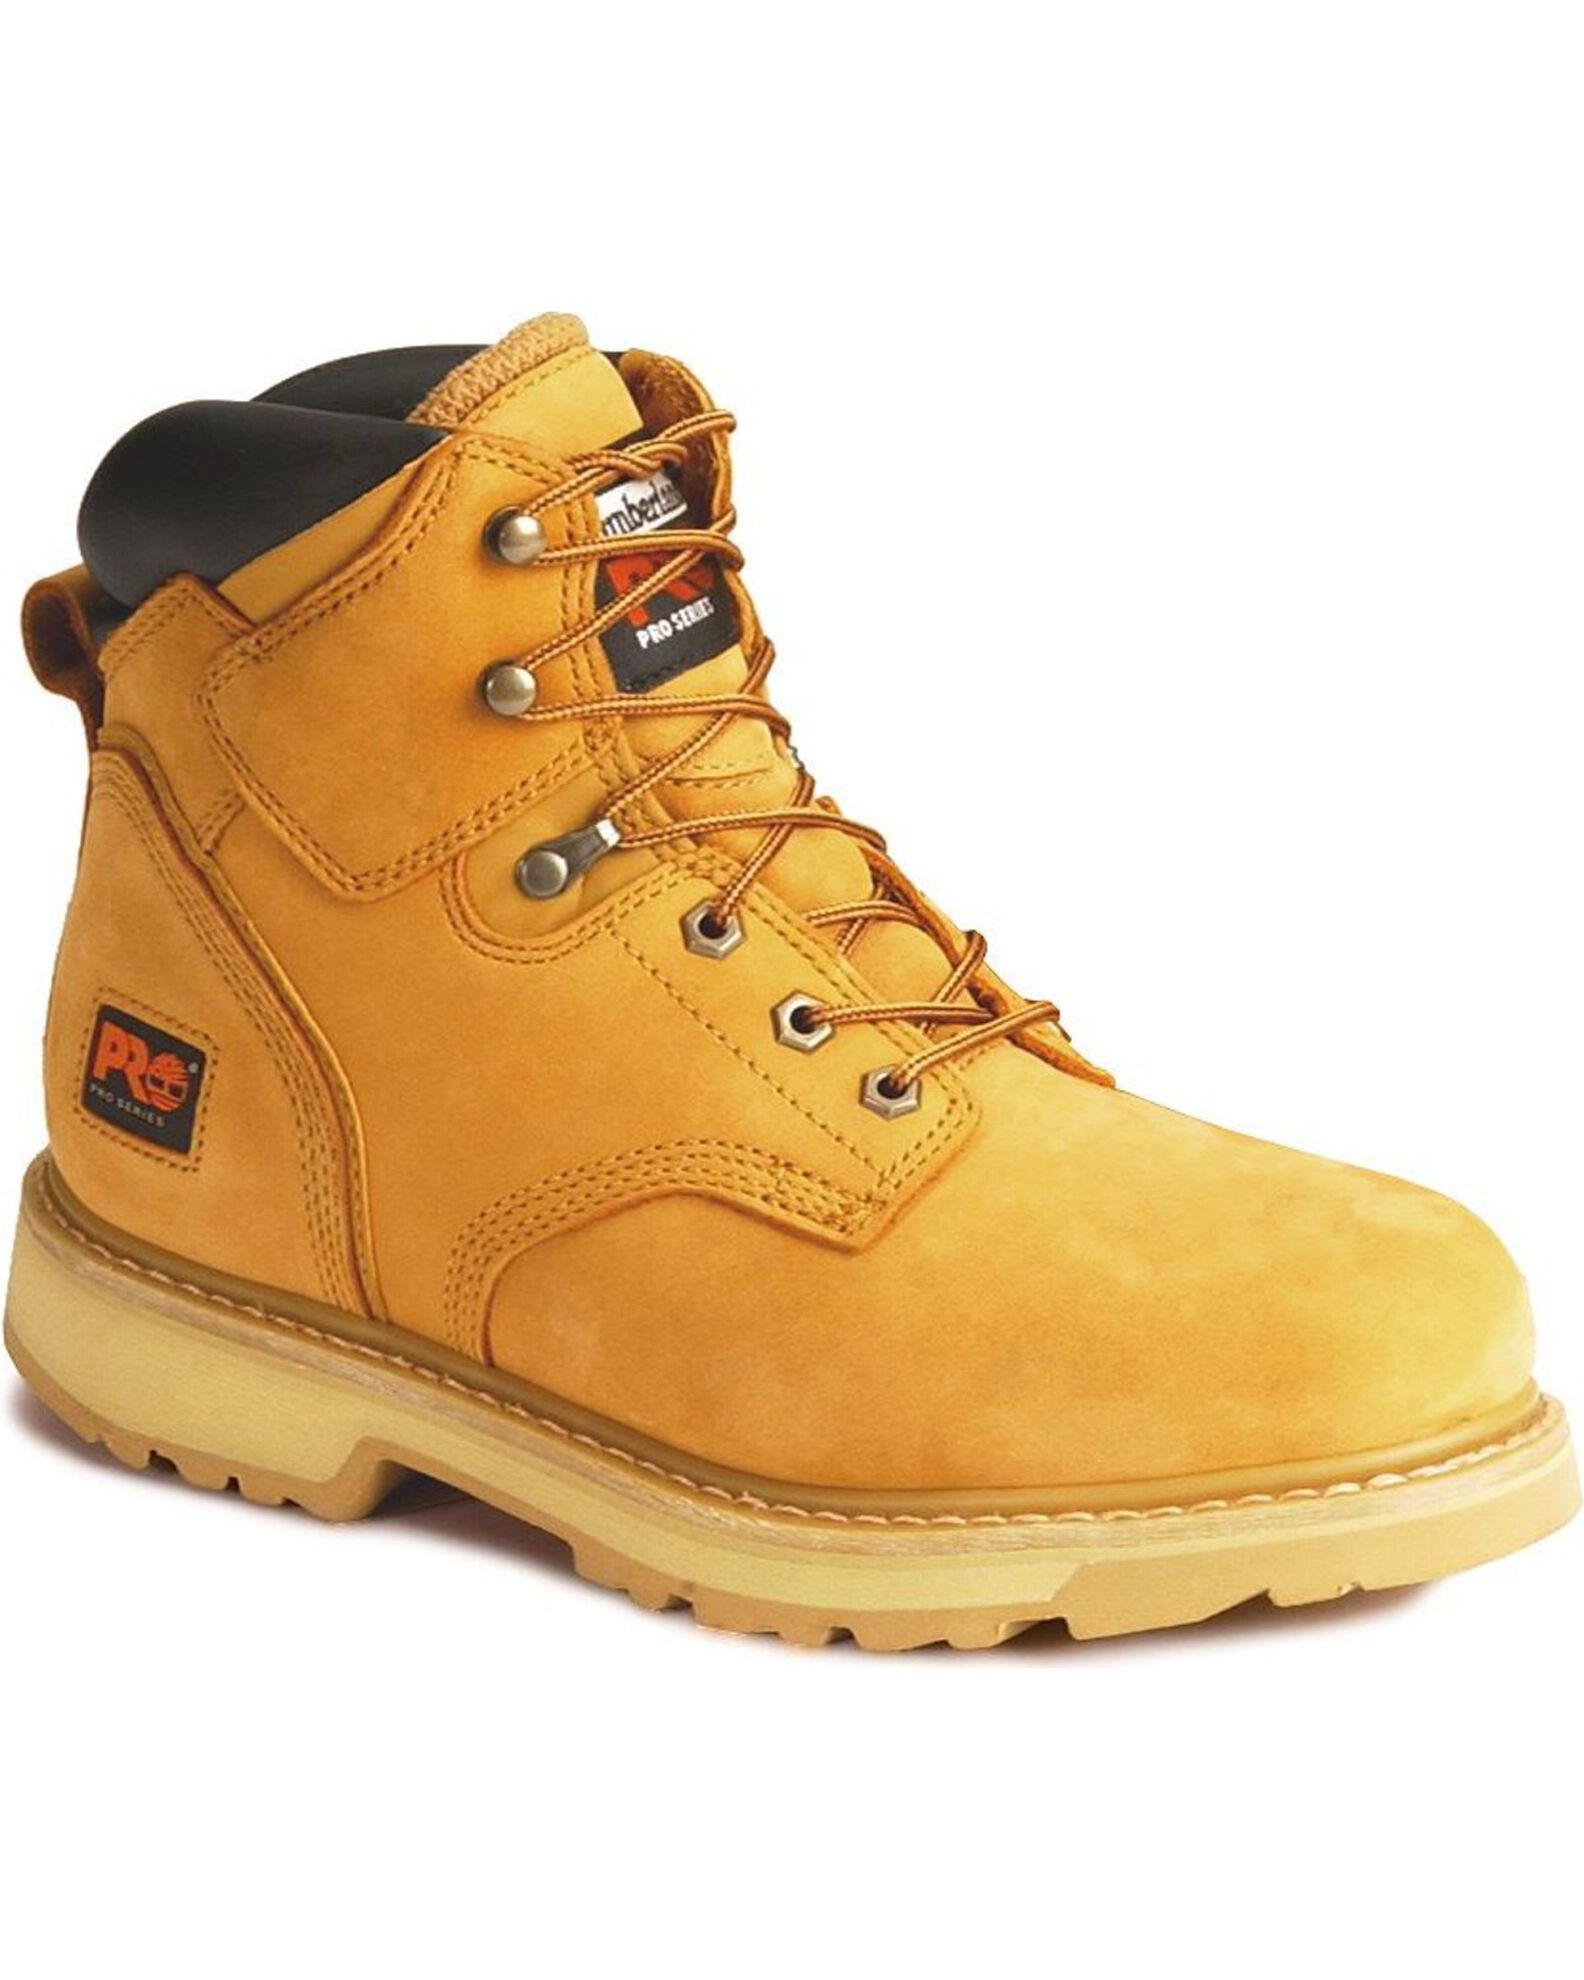 Timberland PRO Pit Boss 6" Lace-Up Boots - Steel Toe | Boot Barn